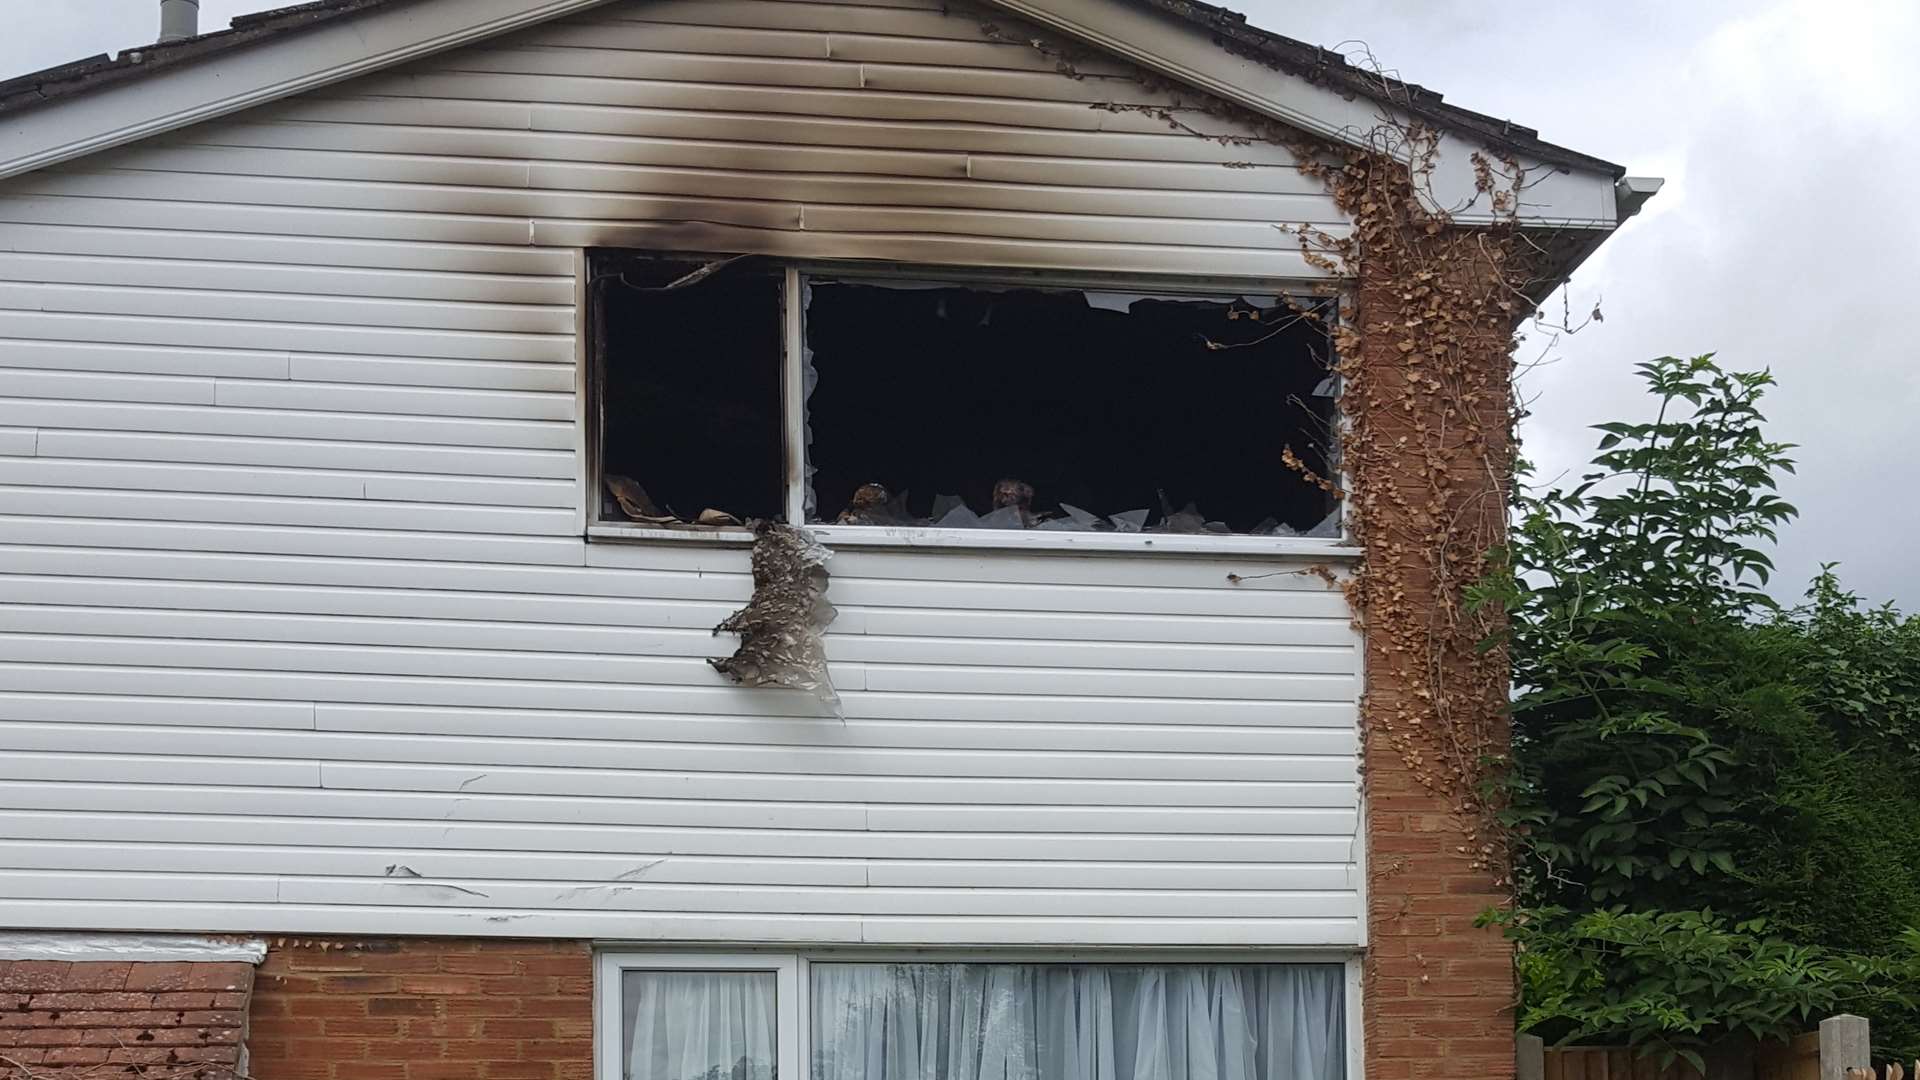 The damaged house in Bicknor Close, Canterbury